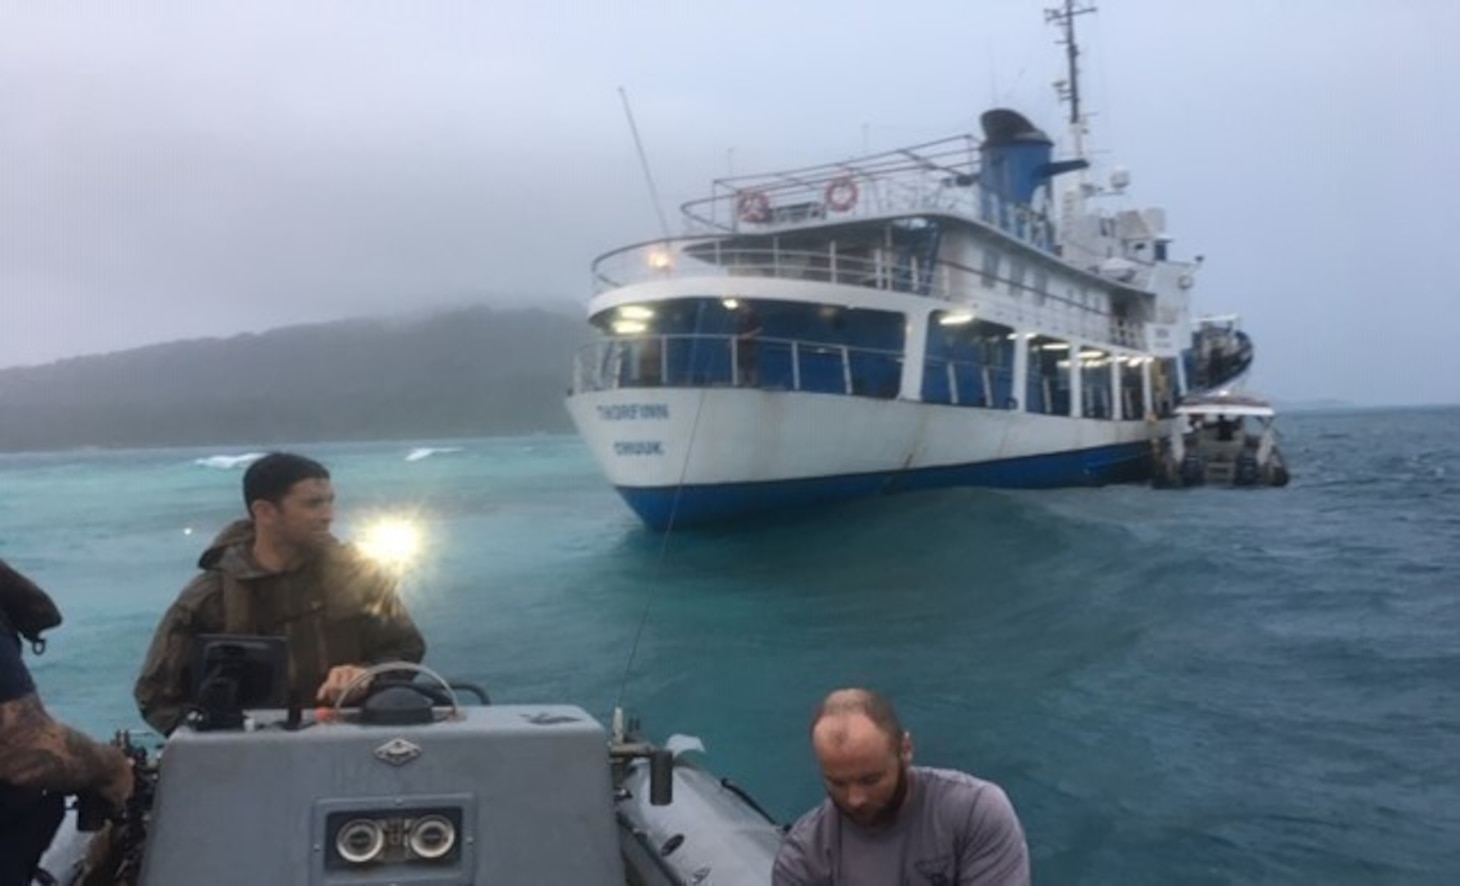 CHUUK LAGOON (Dec. 1, 2019) - Civilian mariners from the Military Sealift Command salvage ship USNS Salvor (ARS 52) and divers from Mobile Diving and Salvage Unit 1 provide assistance to a vessel that had run aground in a storm.